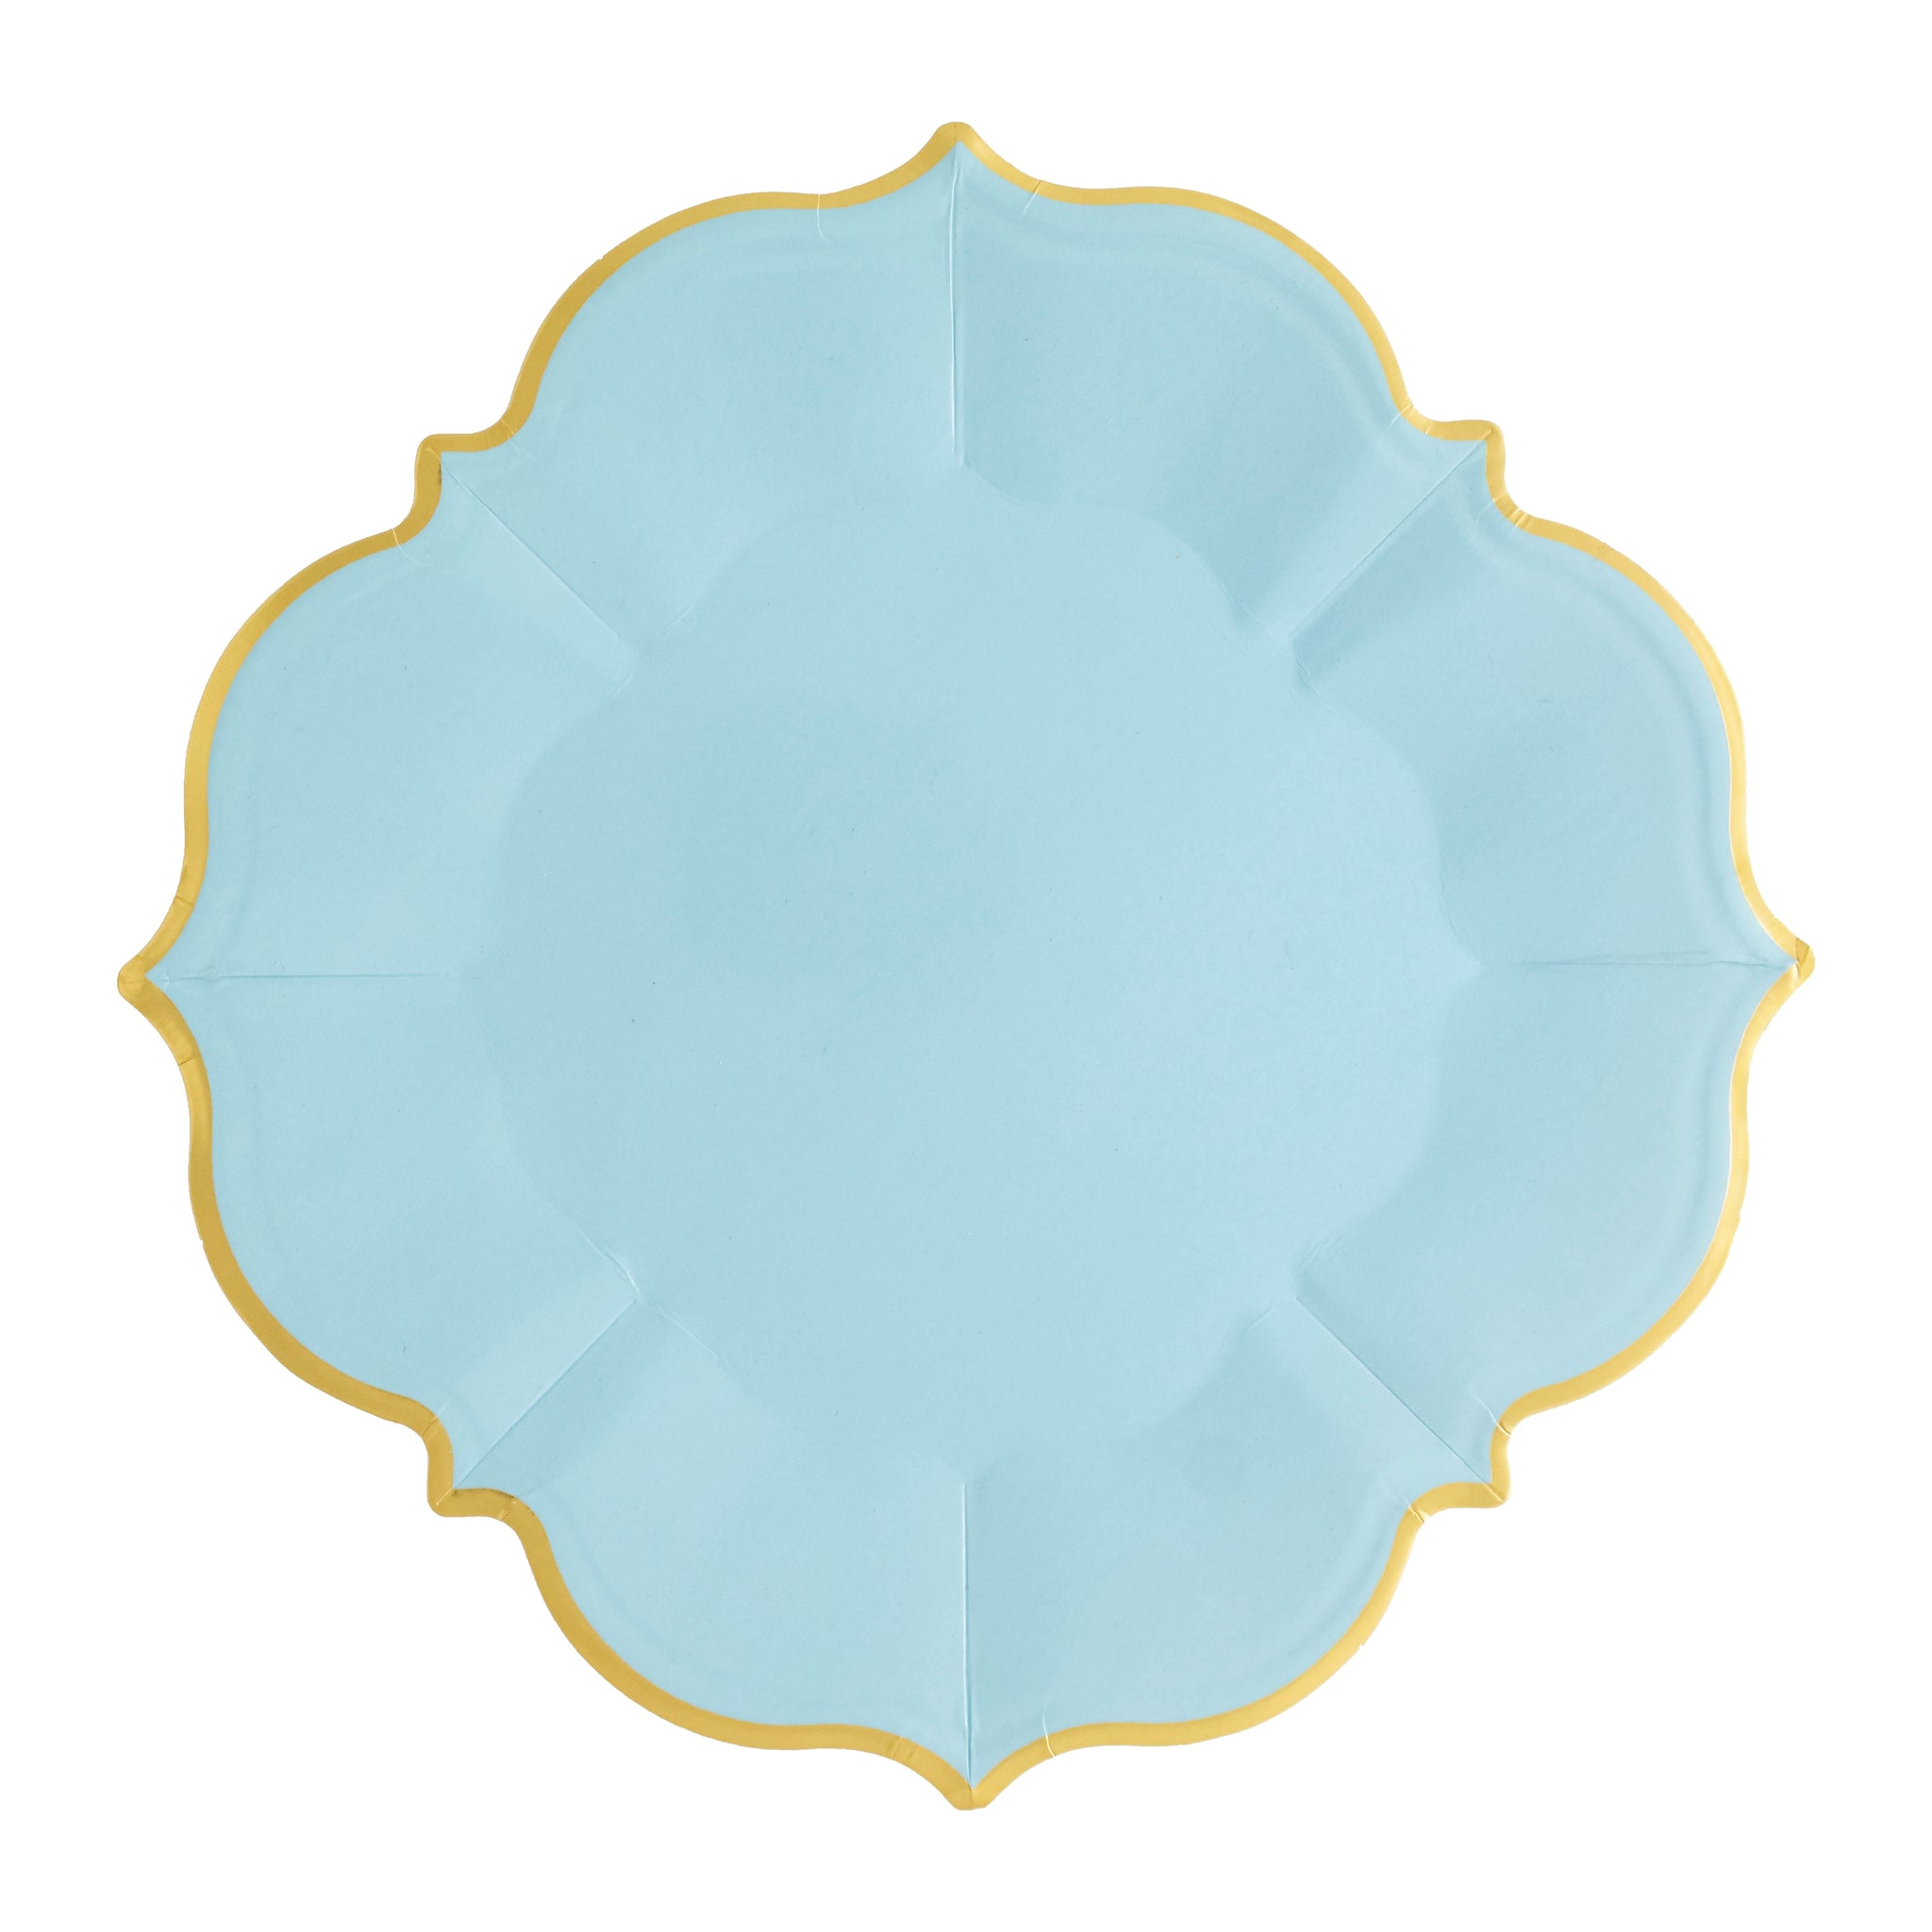 Sky blue plates with gold trim - A Little Confetti